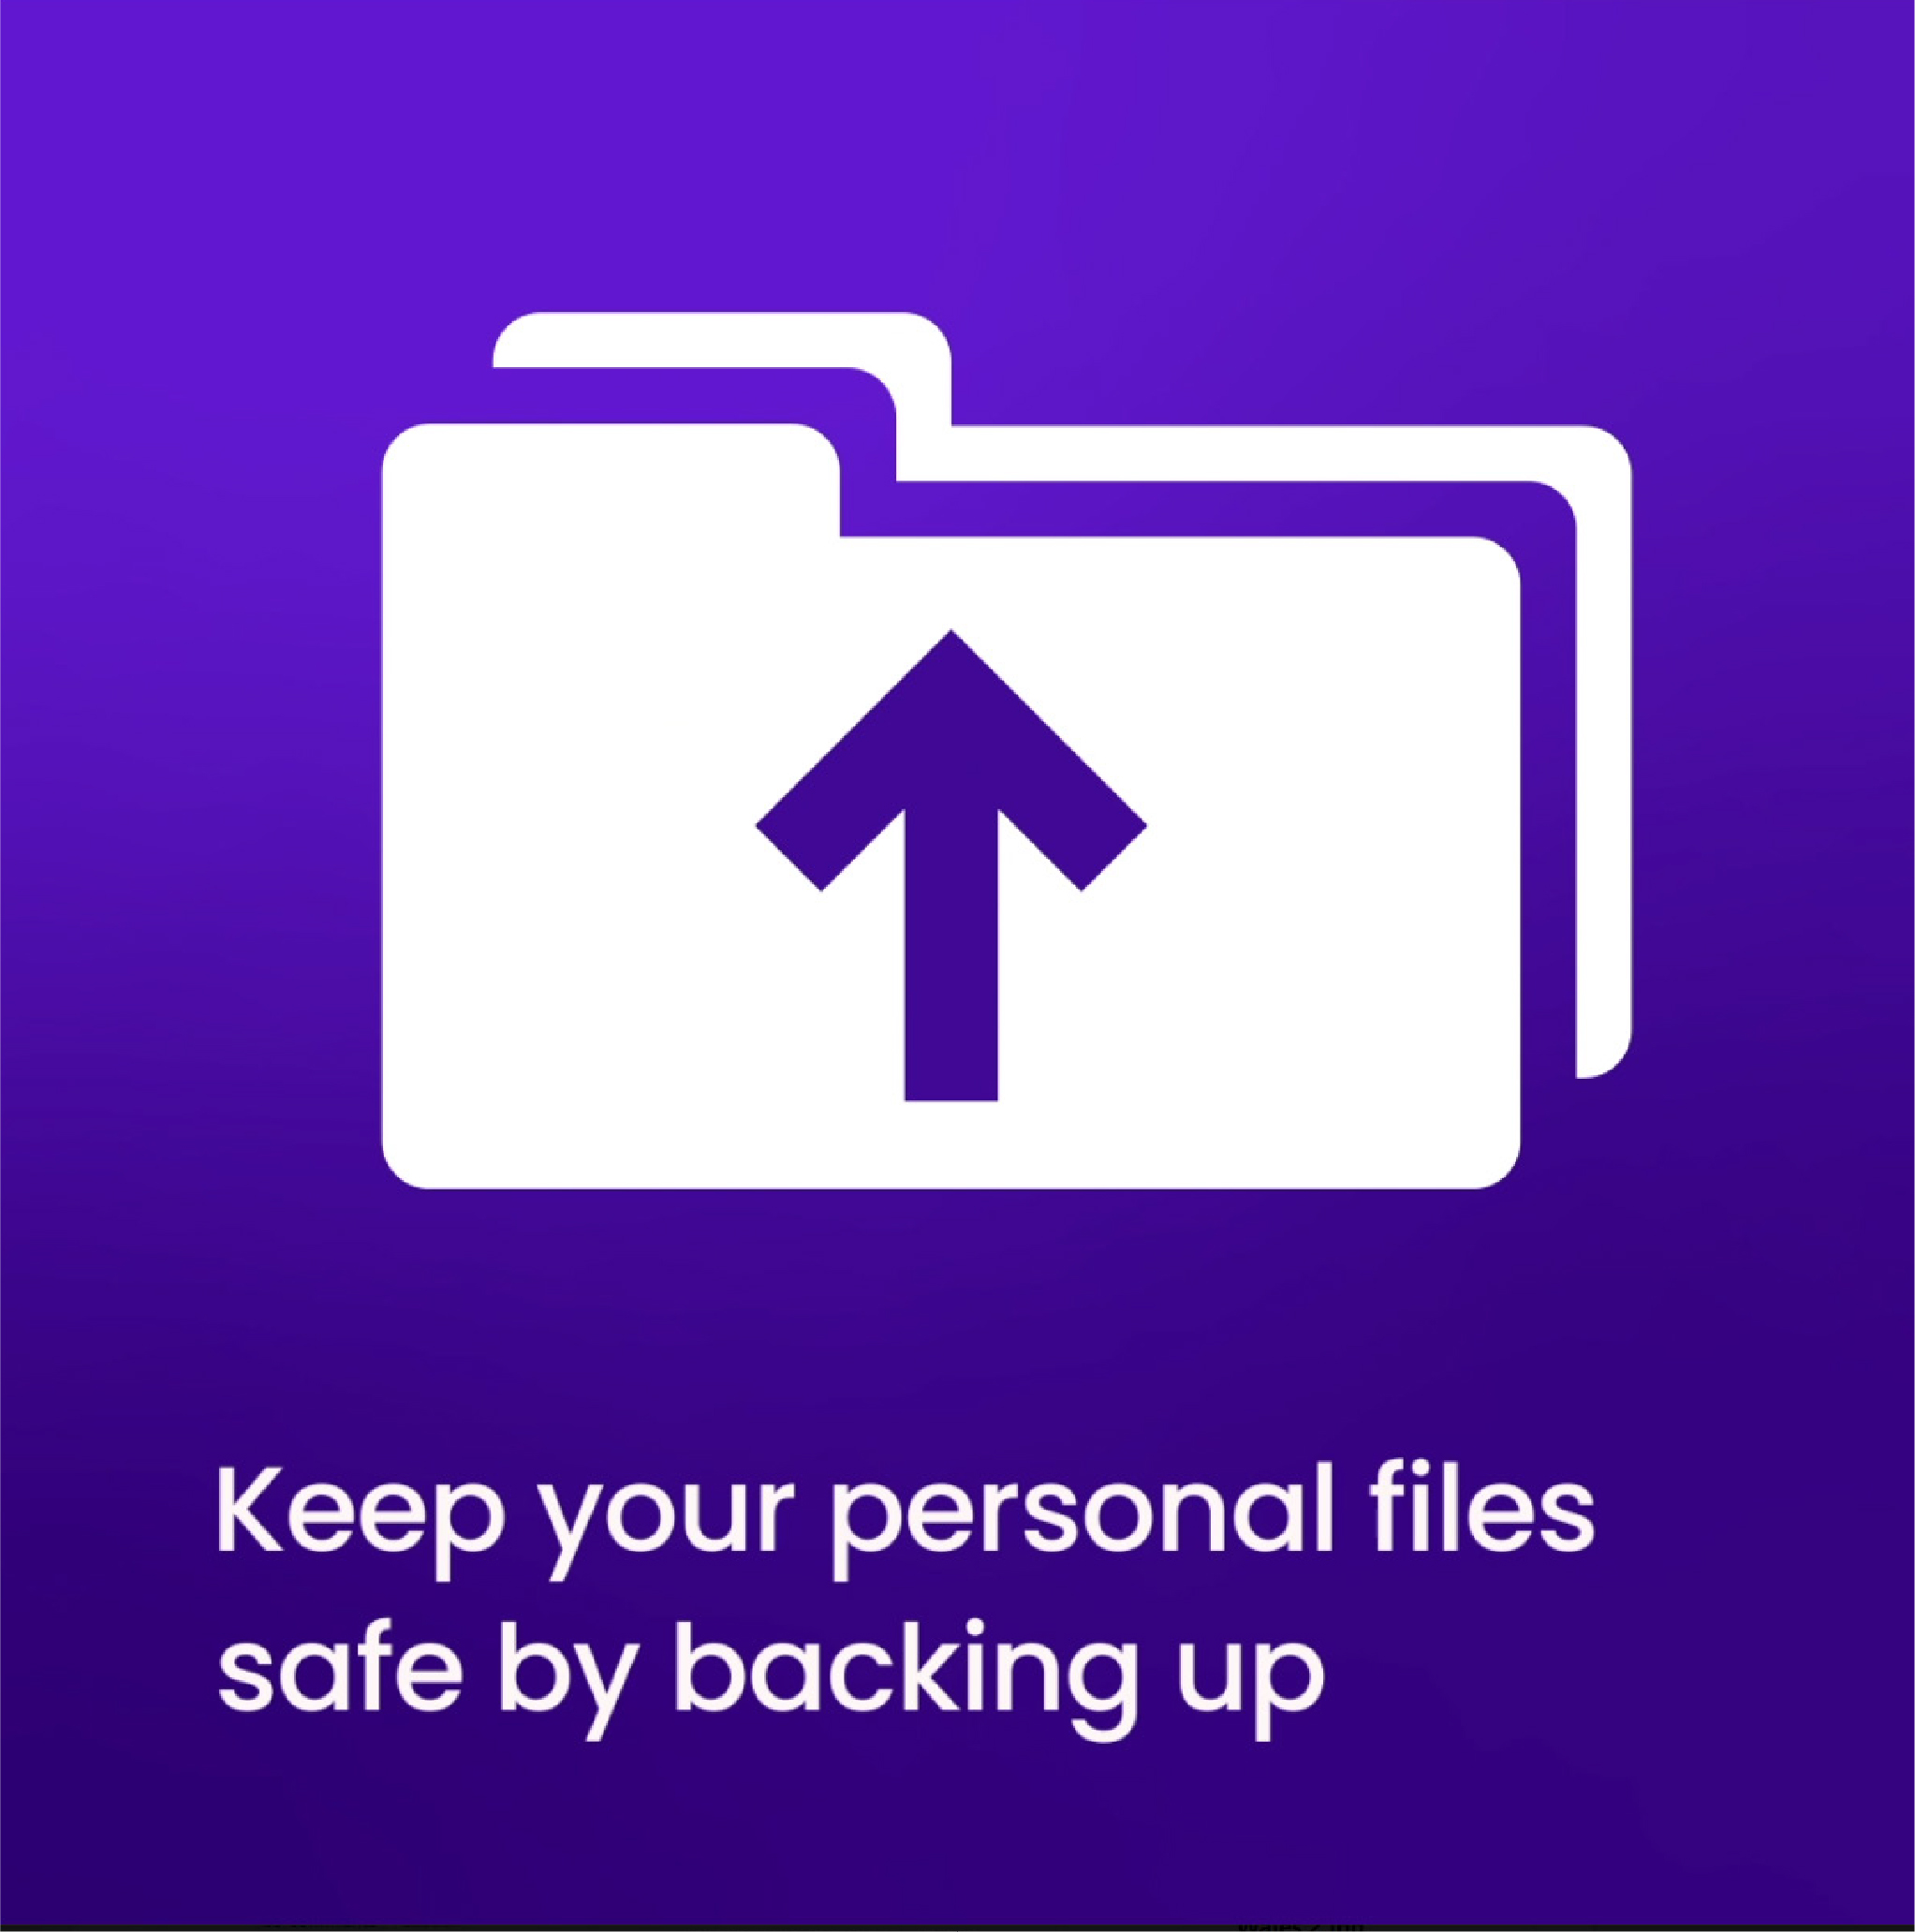 Keep your personal files safe by backing up